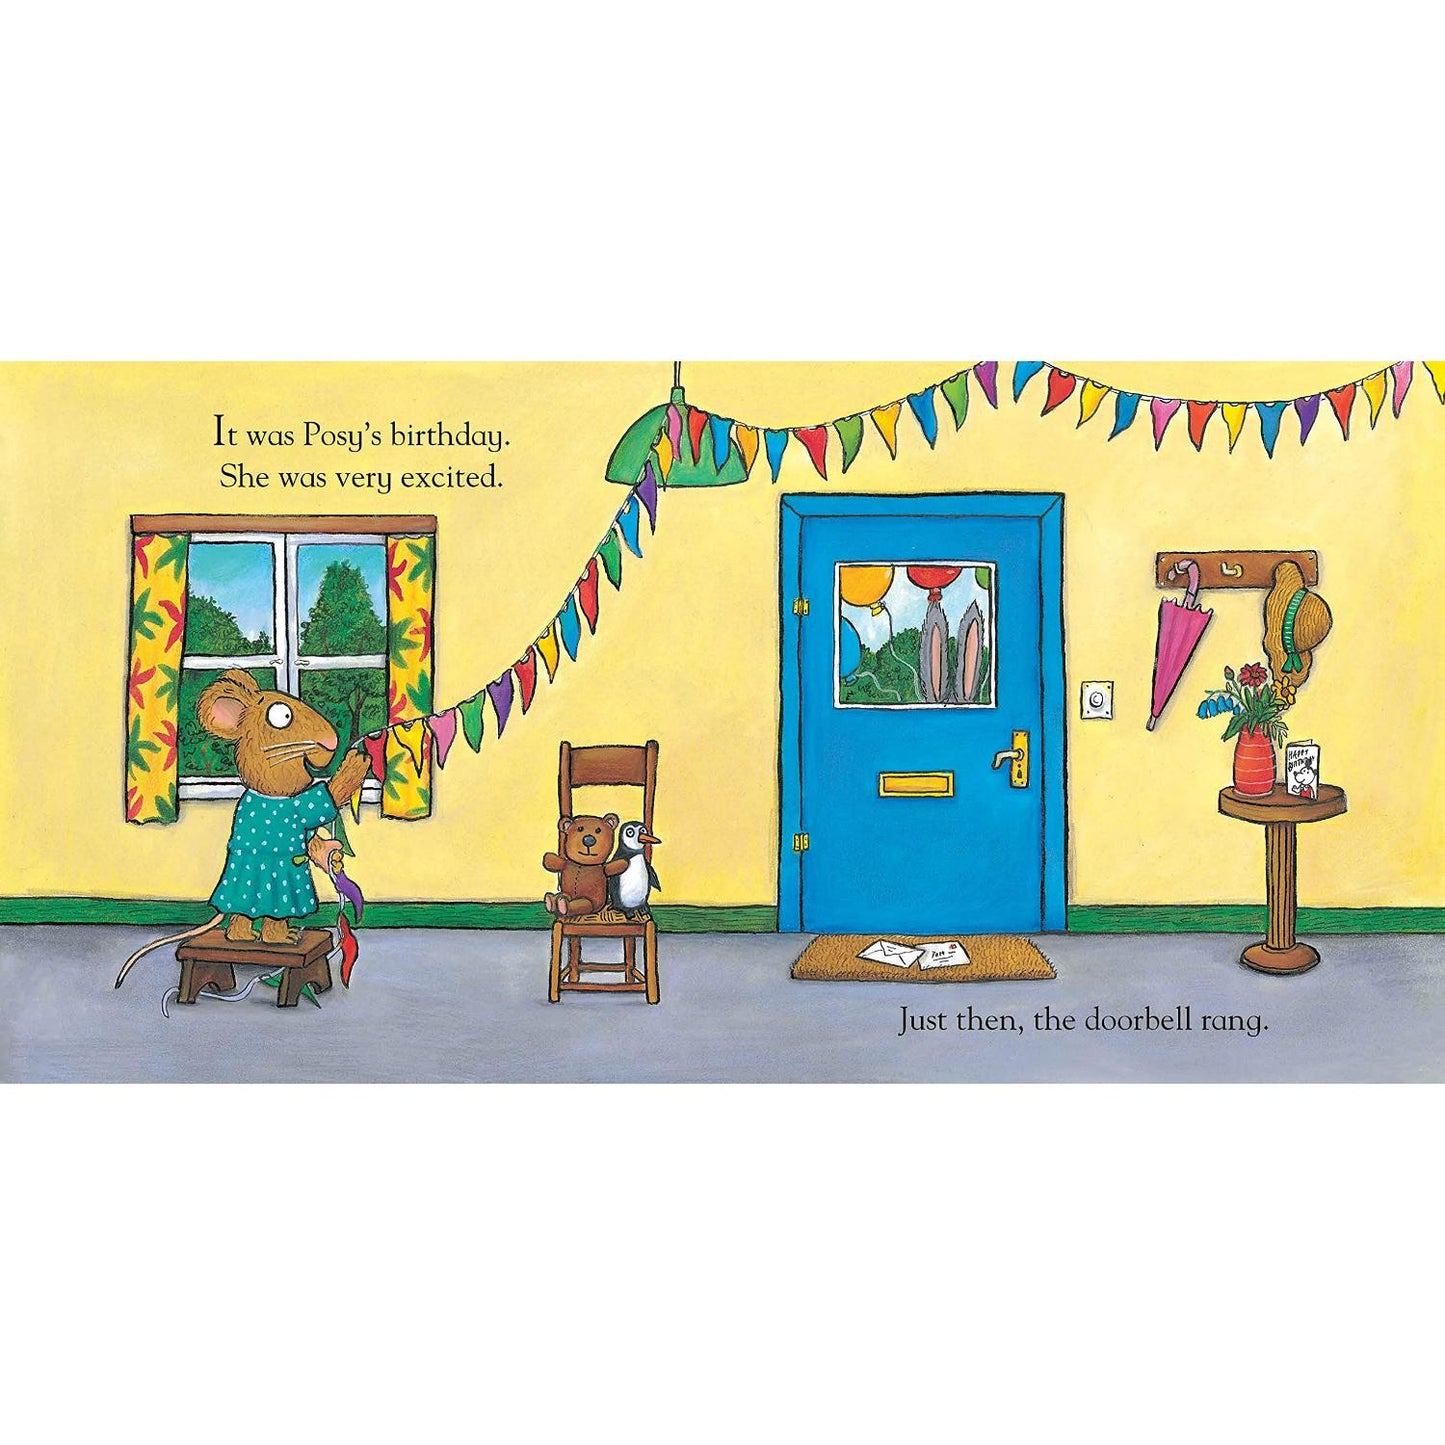 The Birthday Party - Pip & Posy | Hardback | Toddler’s Book on Friendship